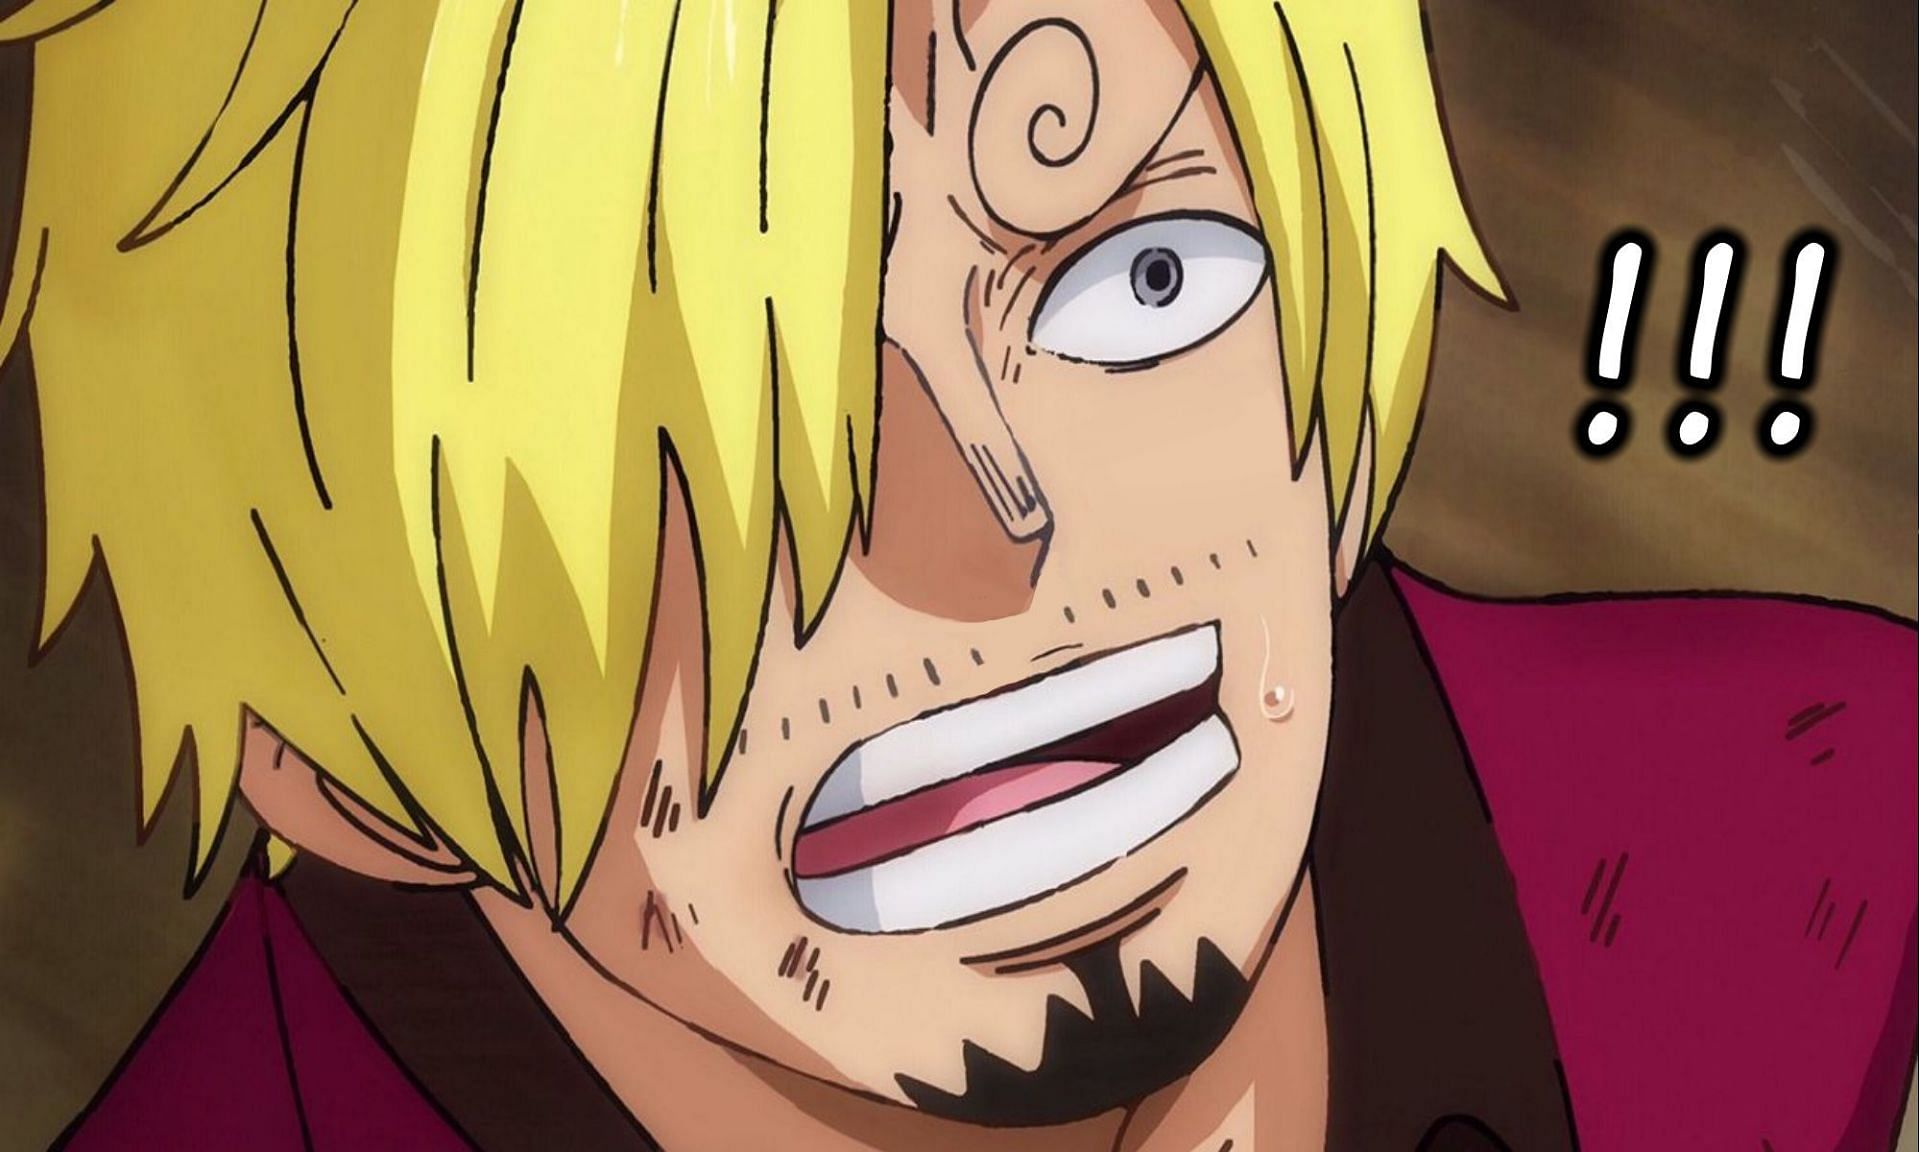 Sanji may fully realize his potential in One Piece (Image via Sportskeeda)